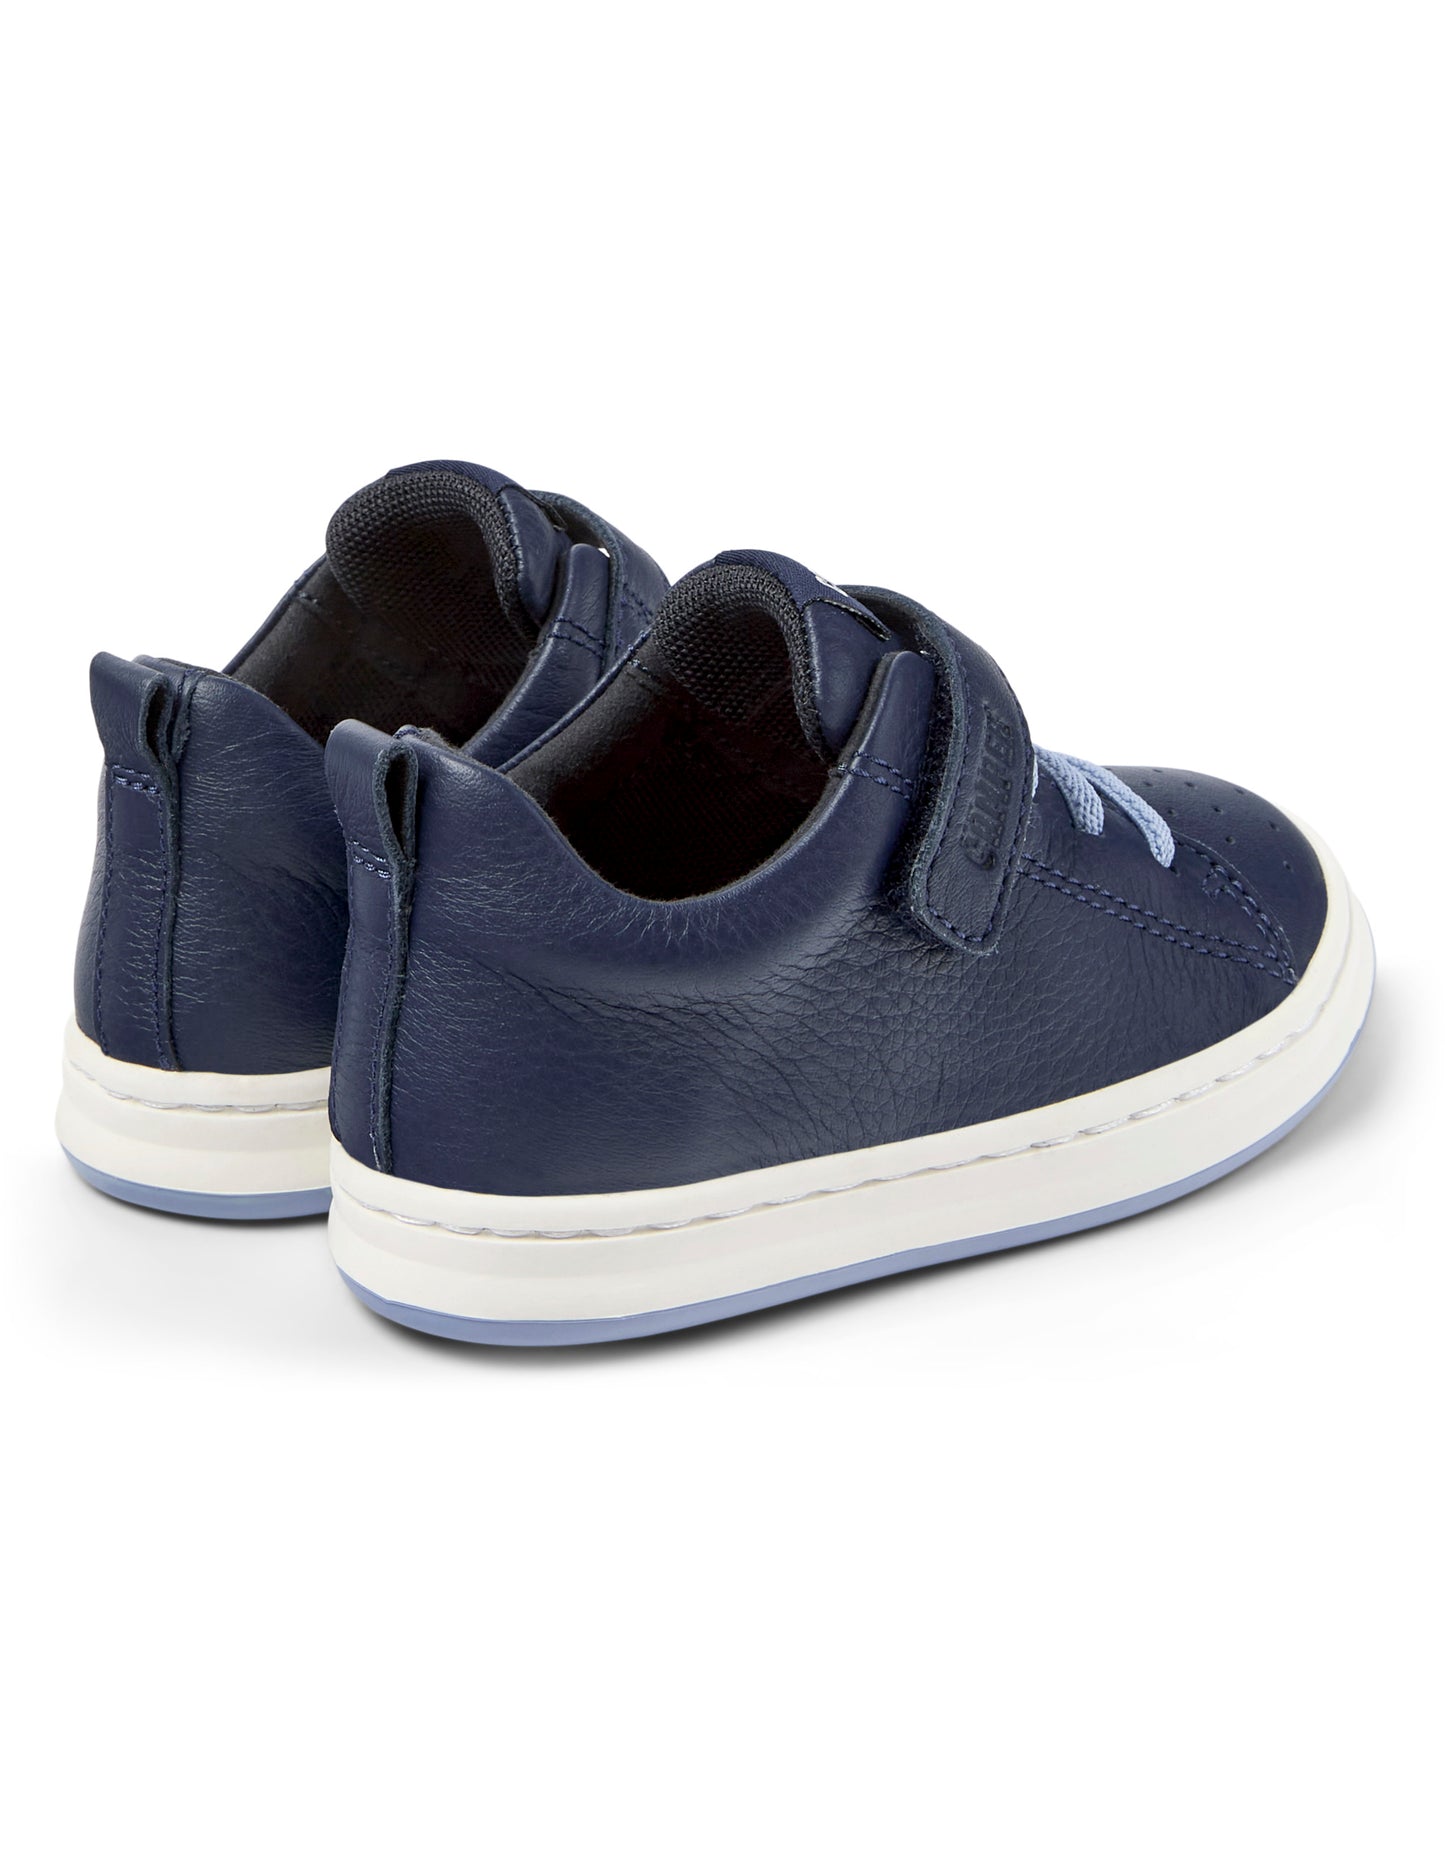 A boys shoe by Camper, style Runner FW, in navy with a velcro strap and light blue elastic laces. Rear angled view of a pair.